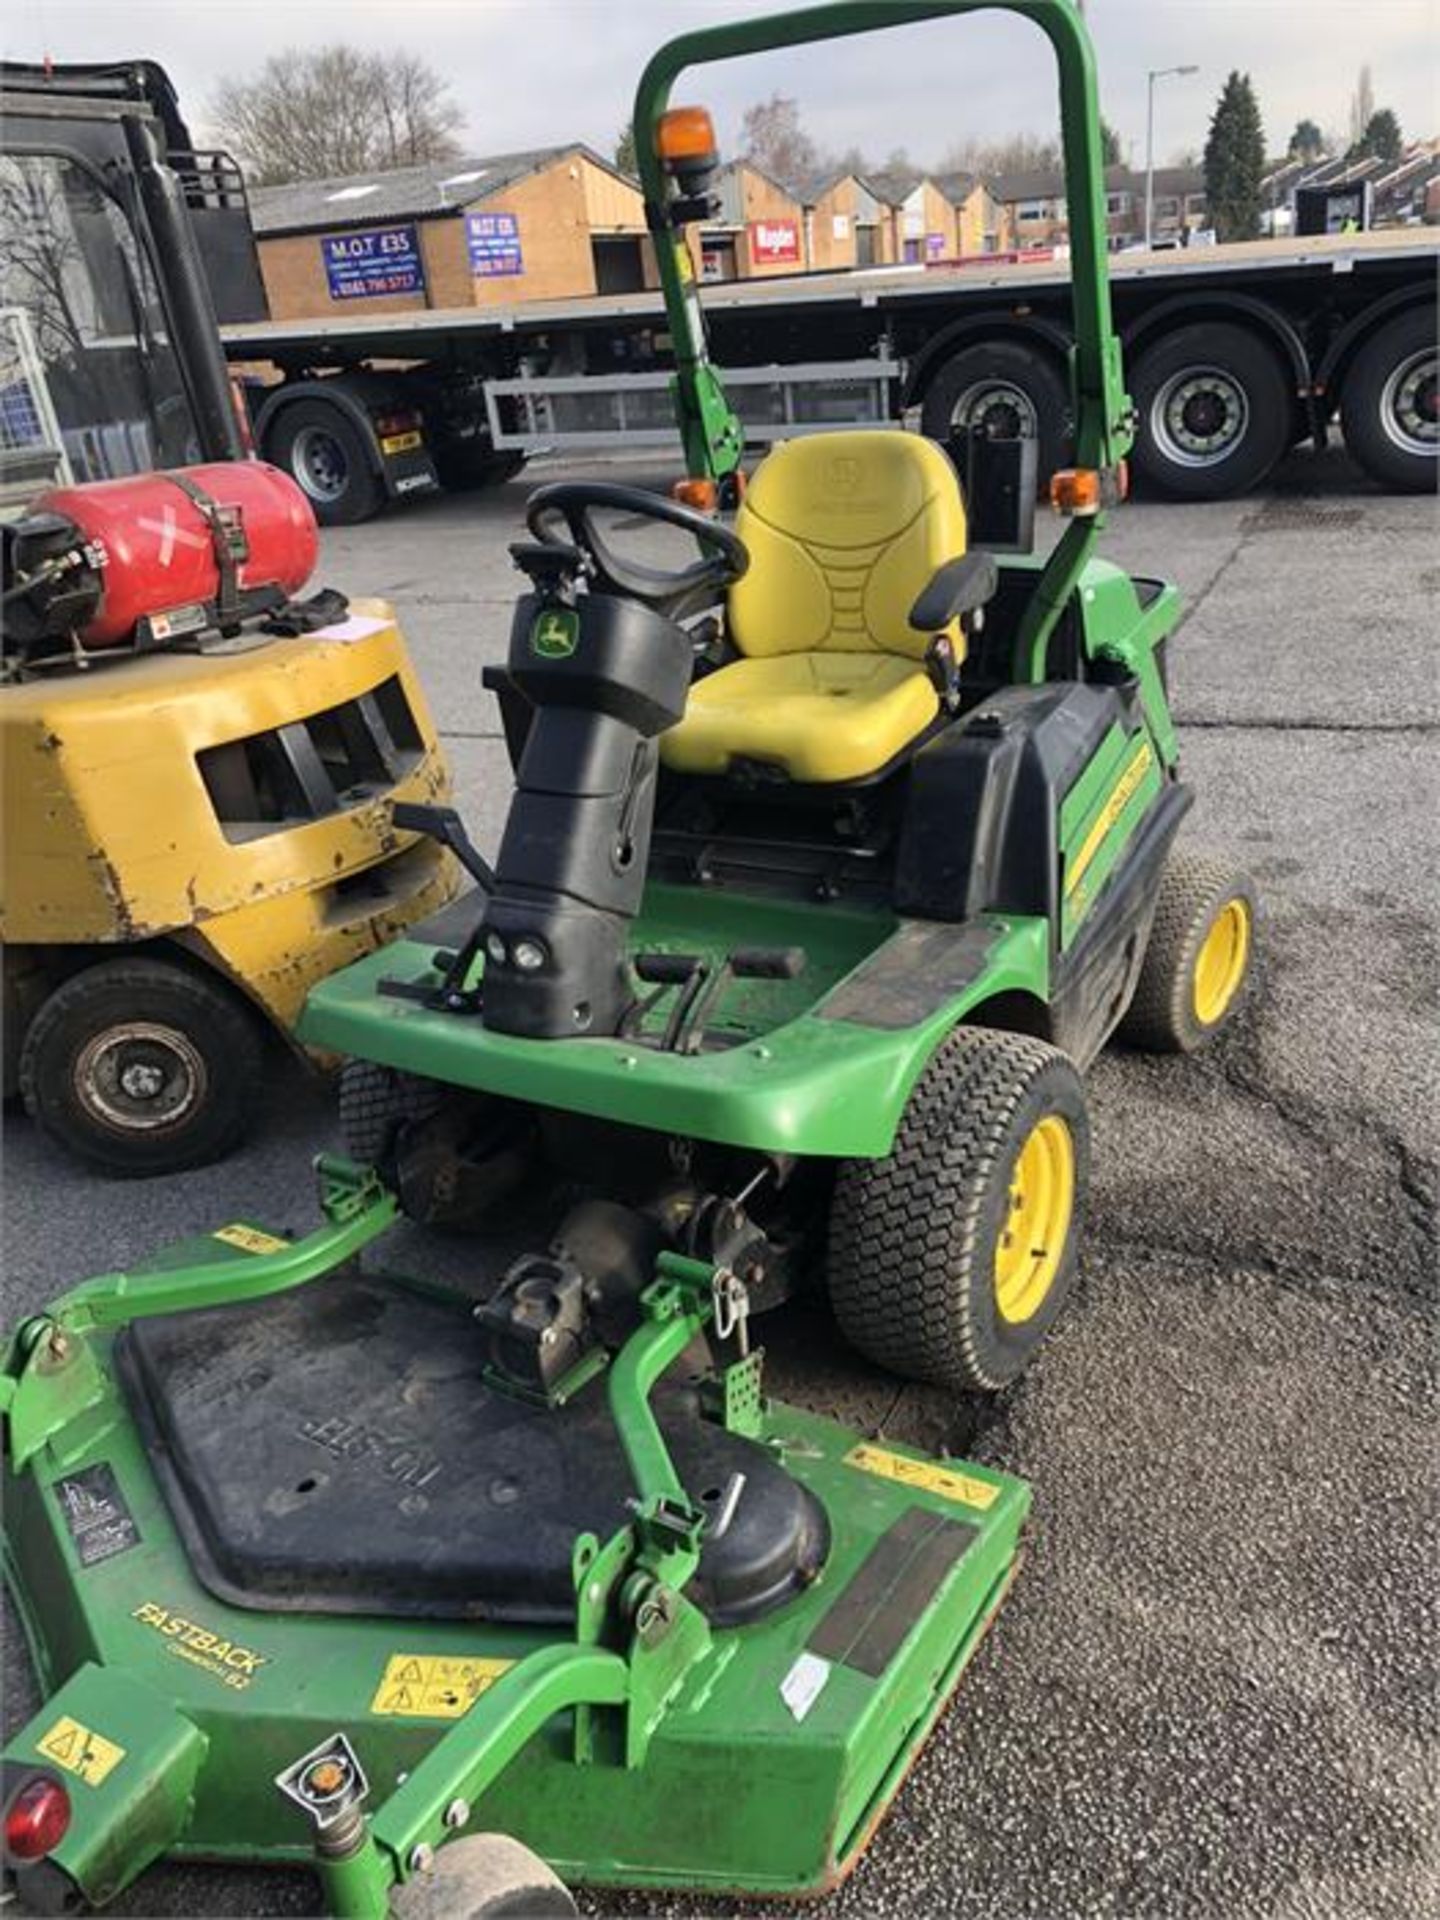 John Deere 1570 TER C 4WD Front Rotary Mower with Fastback Commercial 62 Attachment - Image 2 of 8